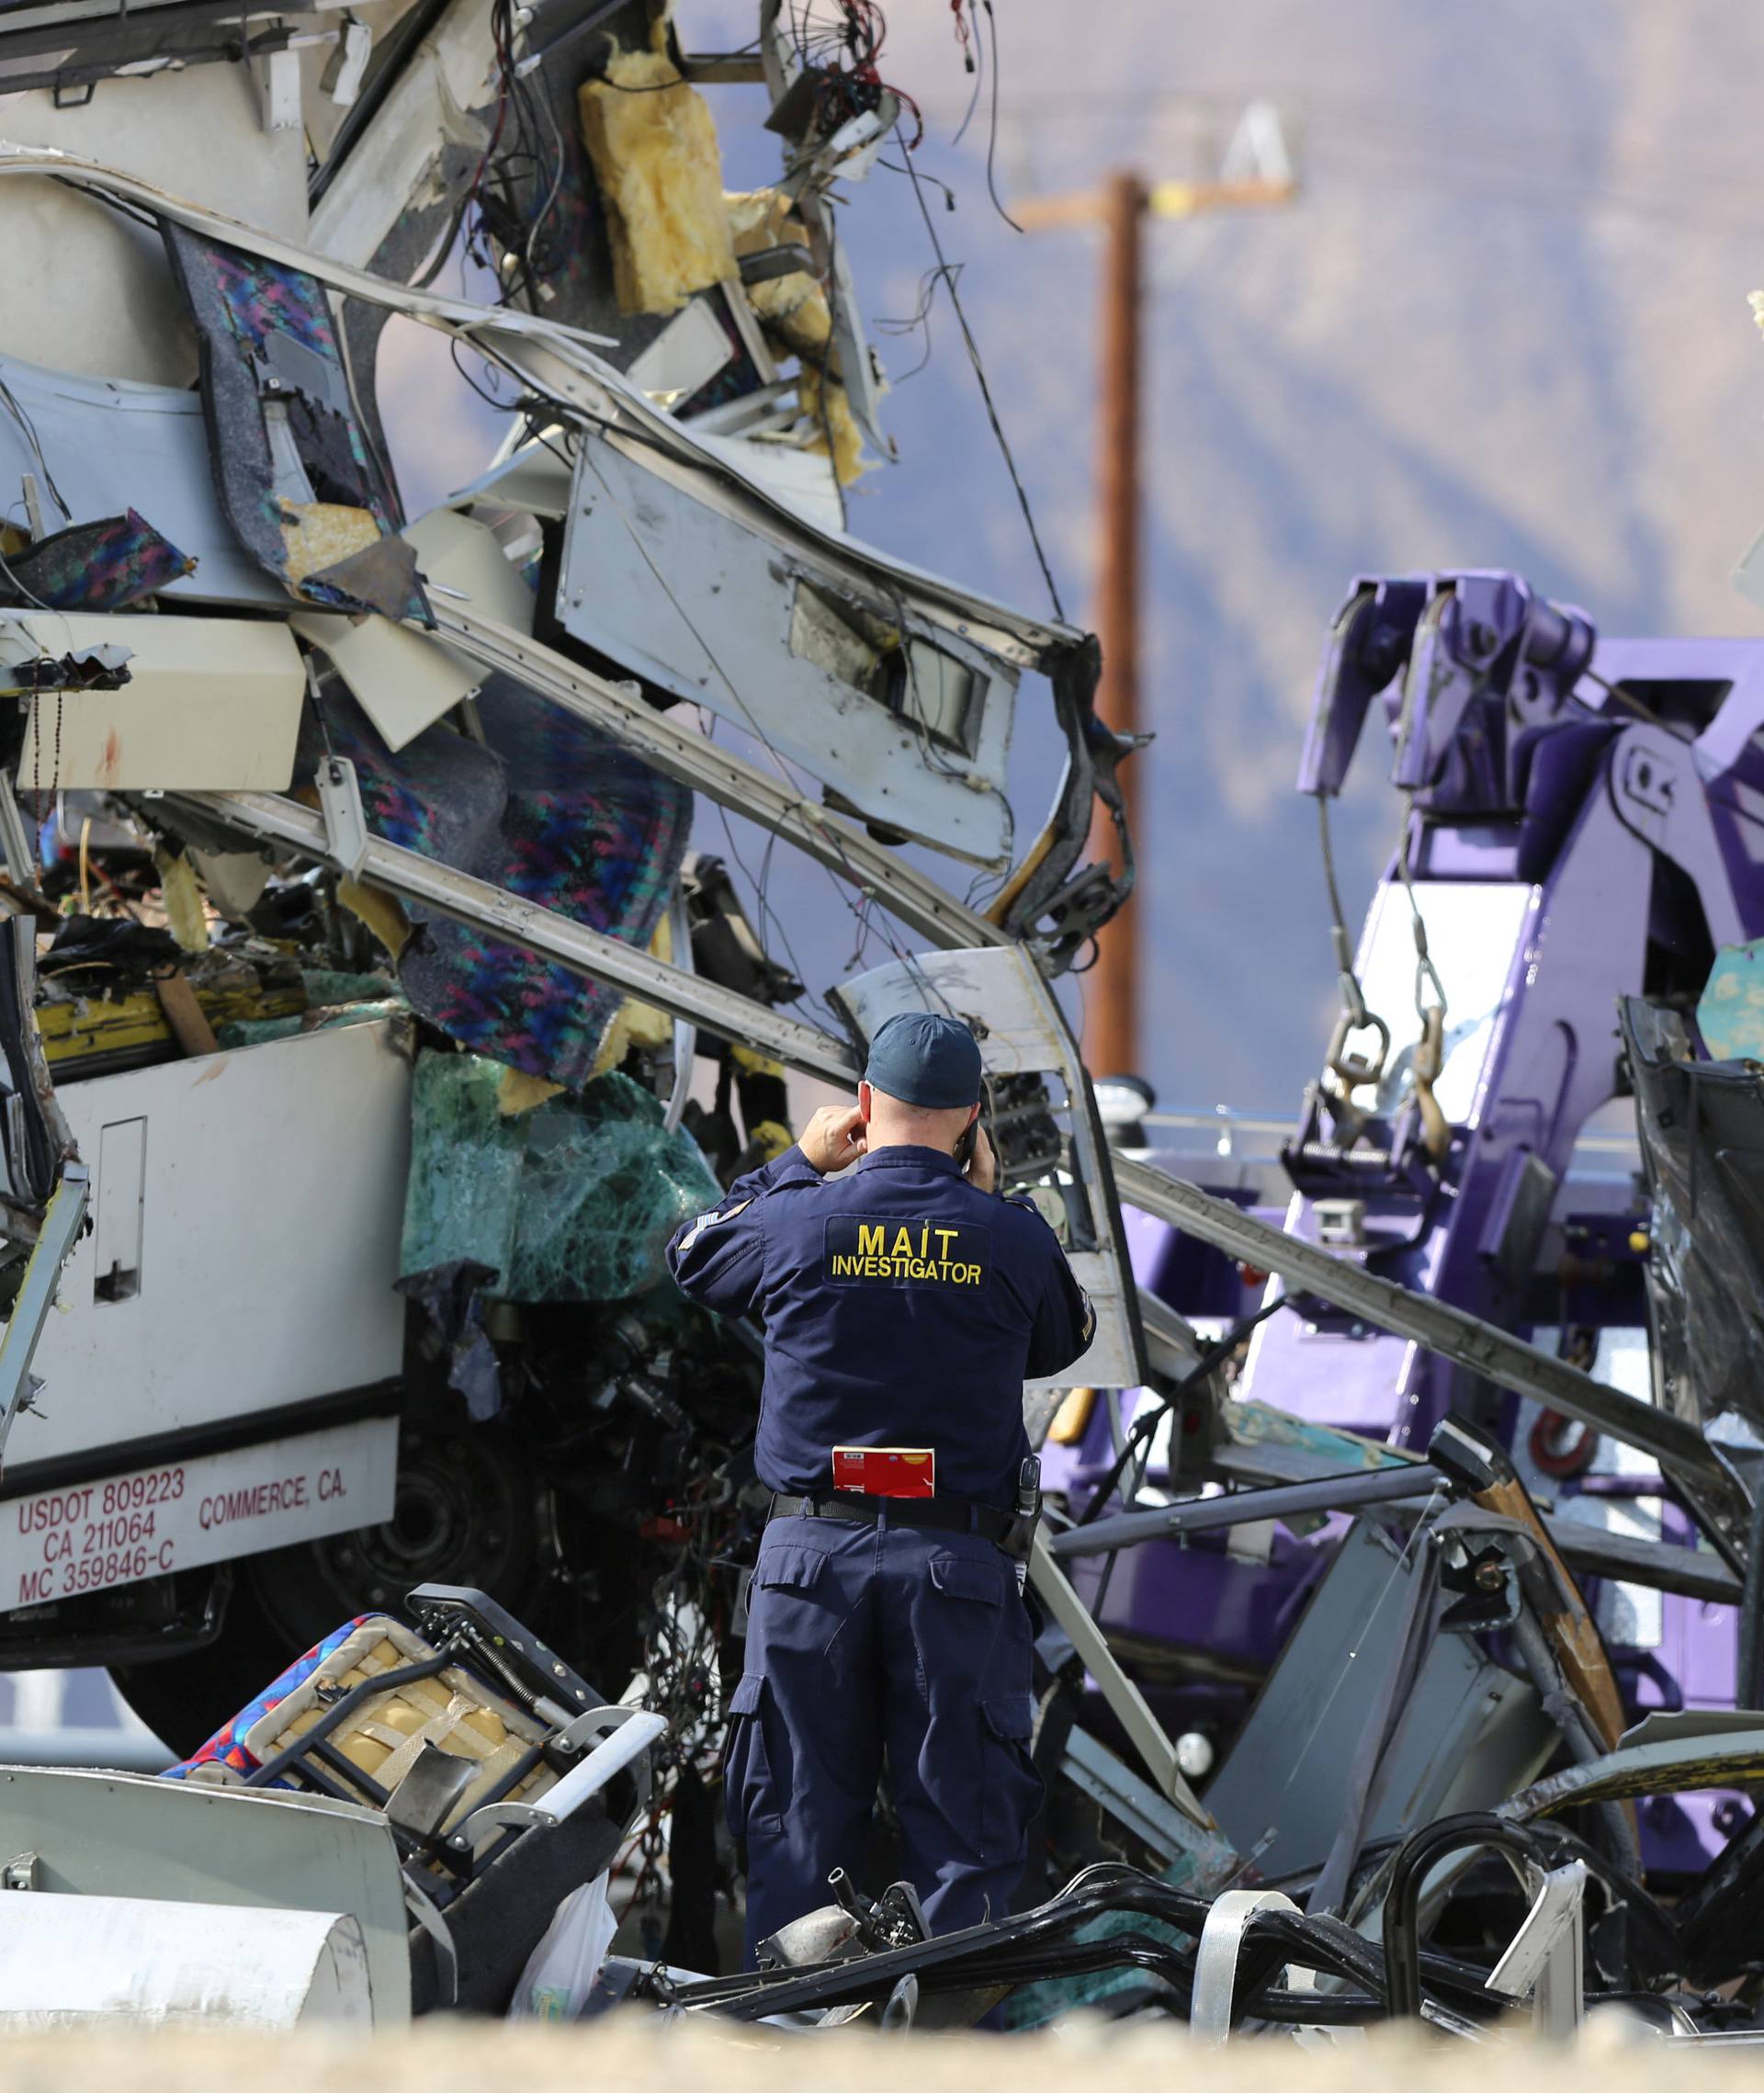 An investigator documents the scene of a mass casualty bus crash on the westbound Interstate 10 freeway near Palm Springs, California